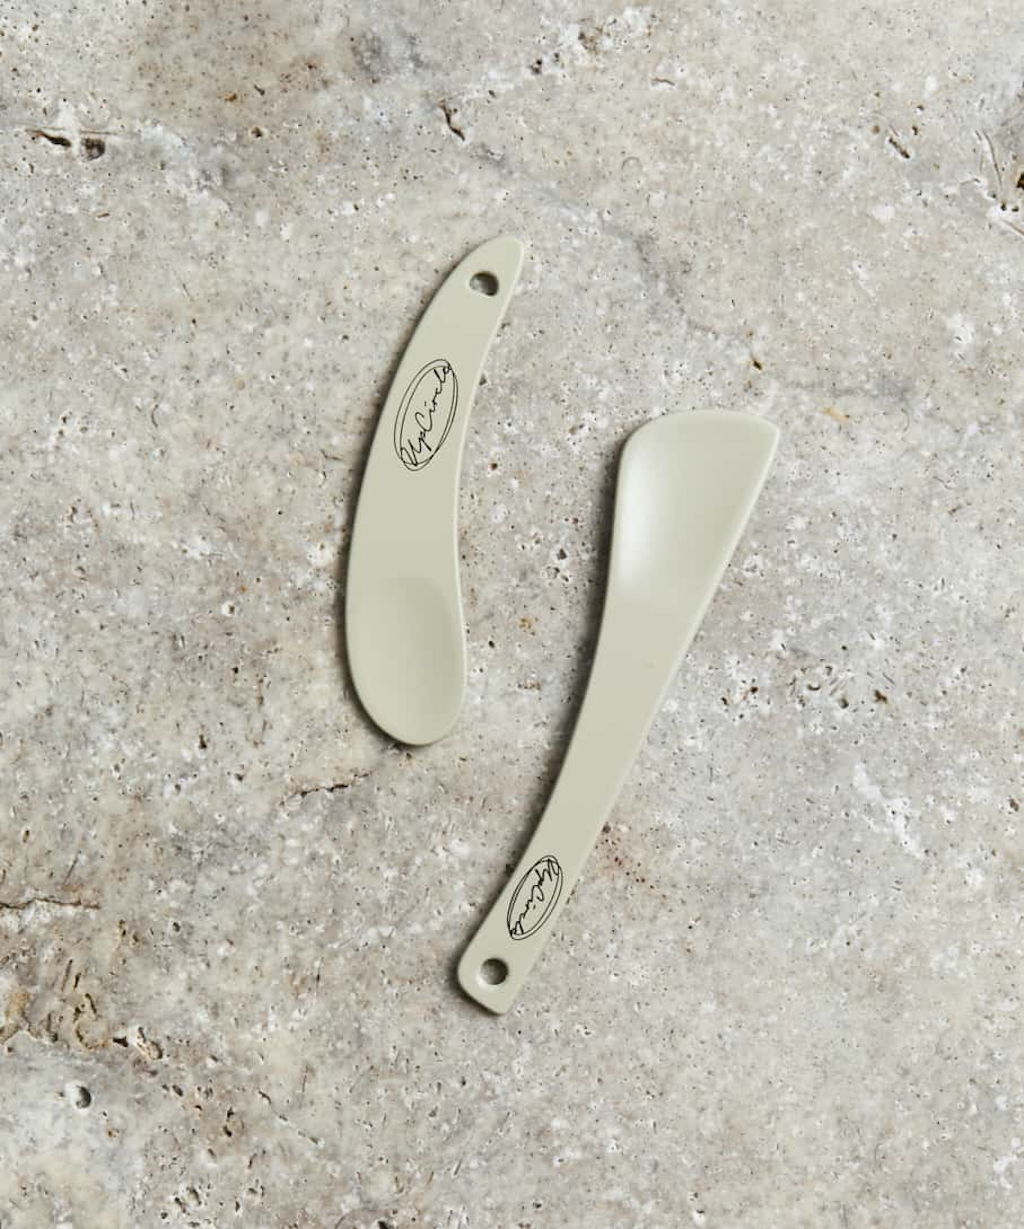 Upcircle Cosmetic Spatulas. Recyclable beauty accessories. The spatulas are pictured on a concrete surface.